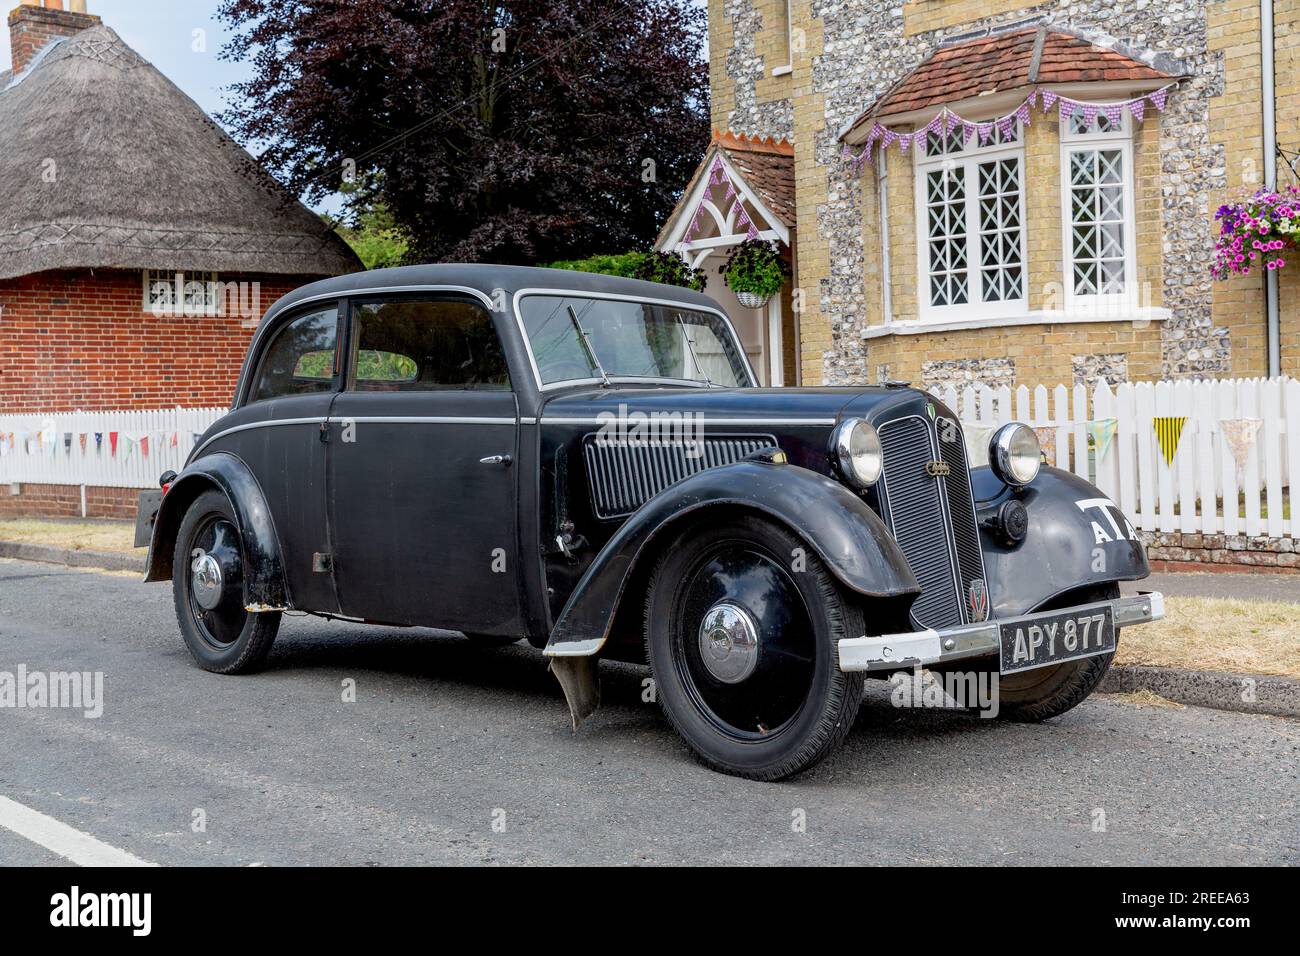 Vintage vehicle at the Southwick Revival in 2023. DKW Dampf-Kraft-Wagen 'steam powered car' from the 1940's, Auto Union vehicle to become Audi. Stock Photo